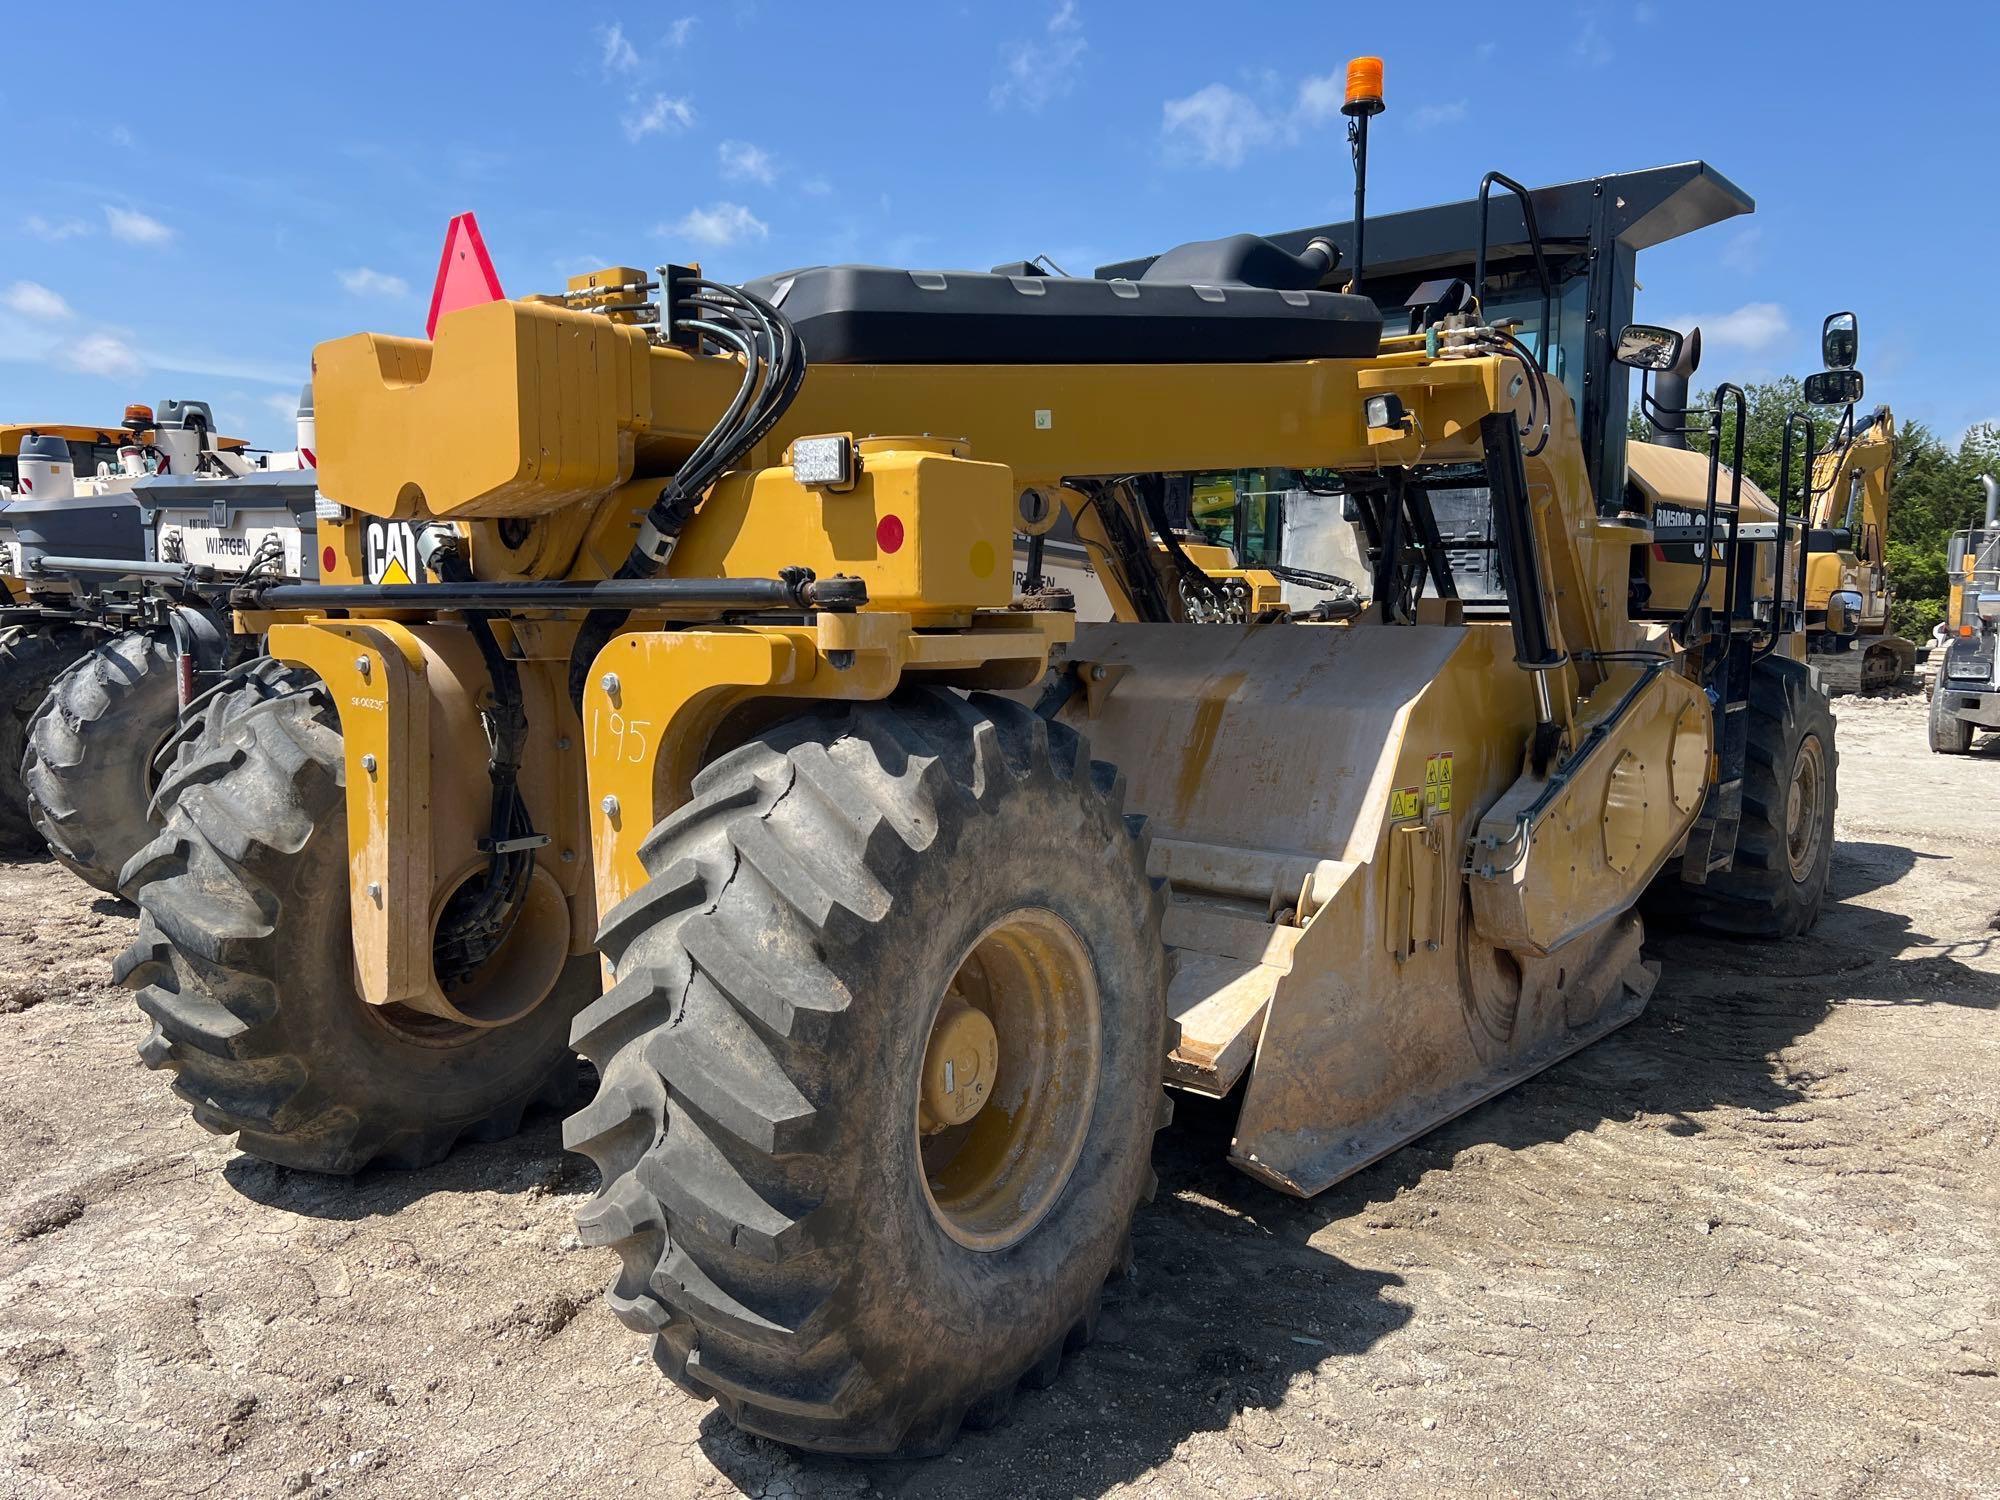 2019 CAT RM500B SOIL STABILIZER SN:CATRM500TMB900235 AWD, powered by Cat diesel engine, equipped